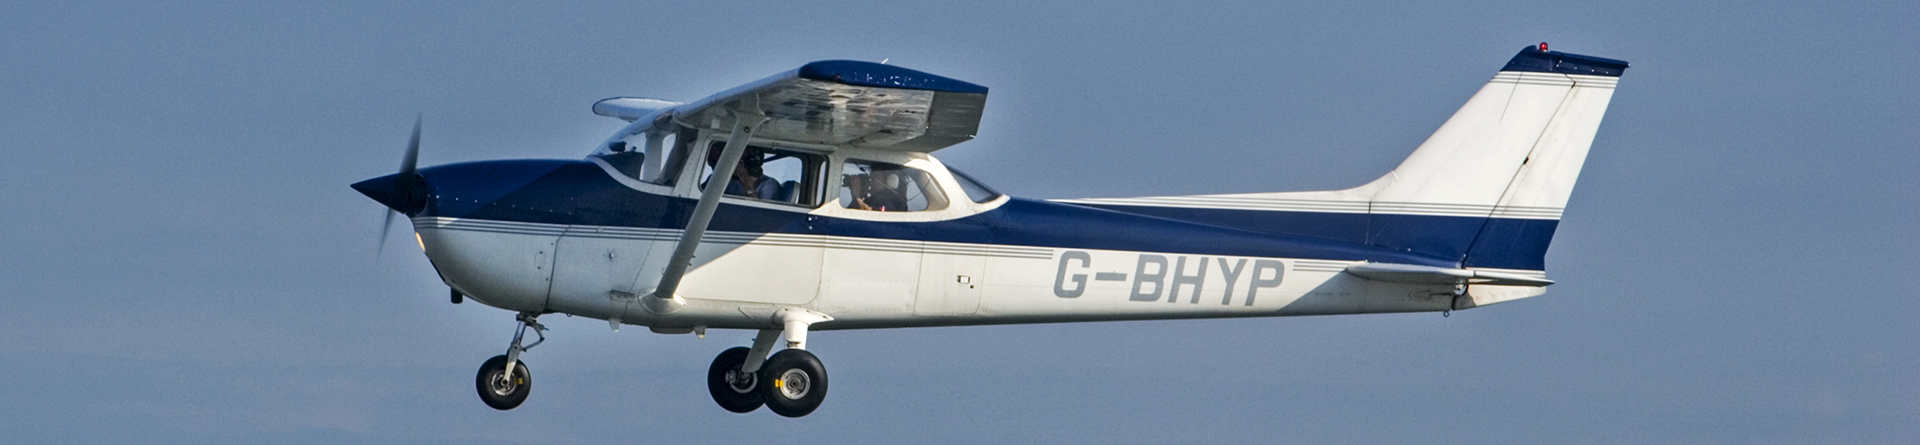 Colour photo showing a high winged single engine pane in flight